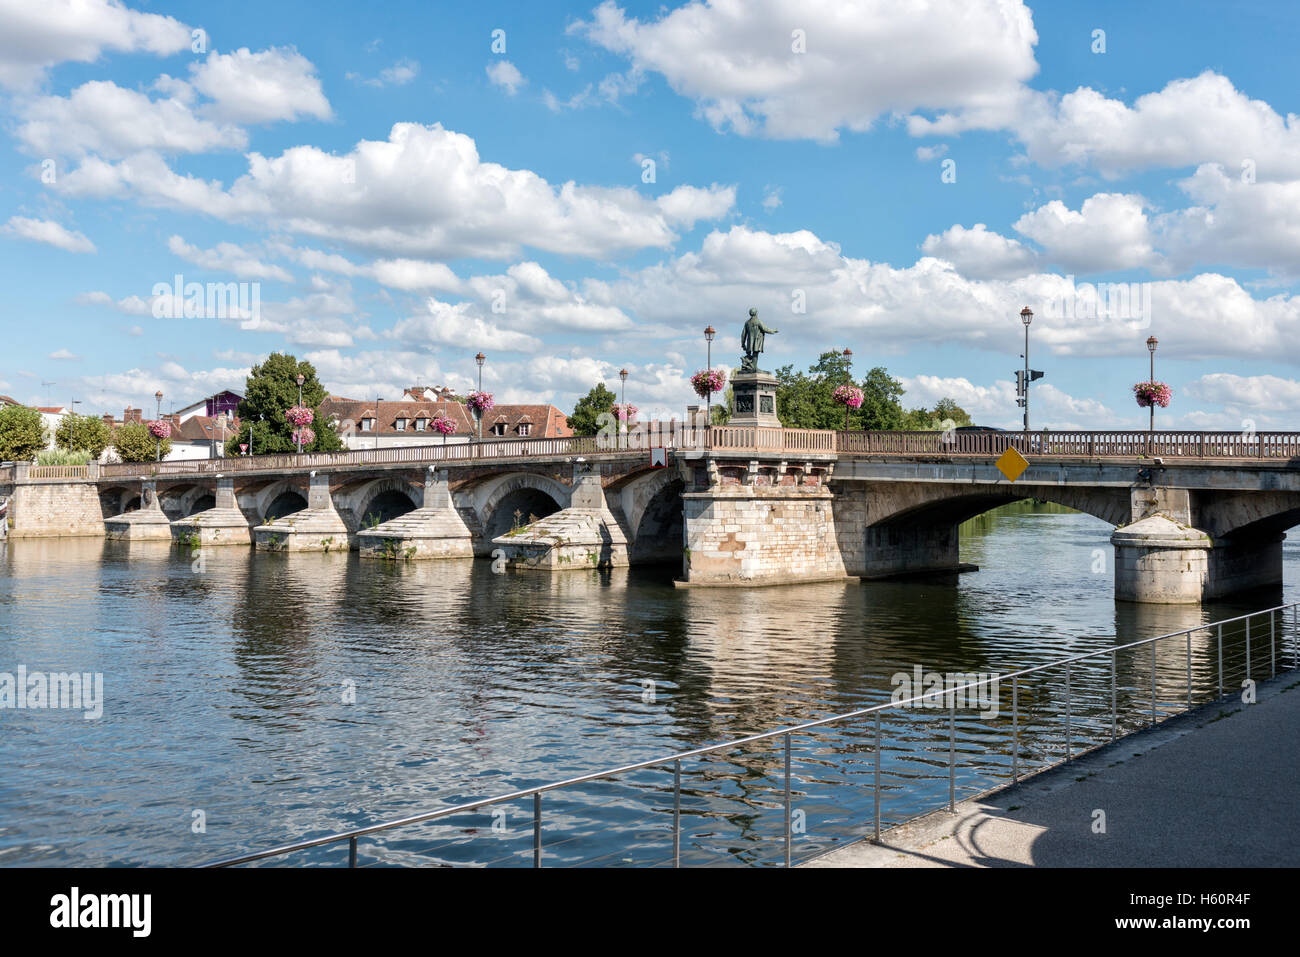 The Bridge, Pont Paul Bert across the river Yonne in Auxerre, Burgundy, France on a sunny summers day Stock Photo